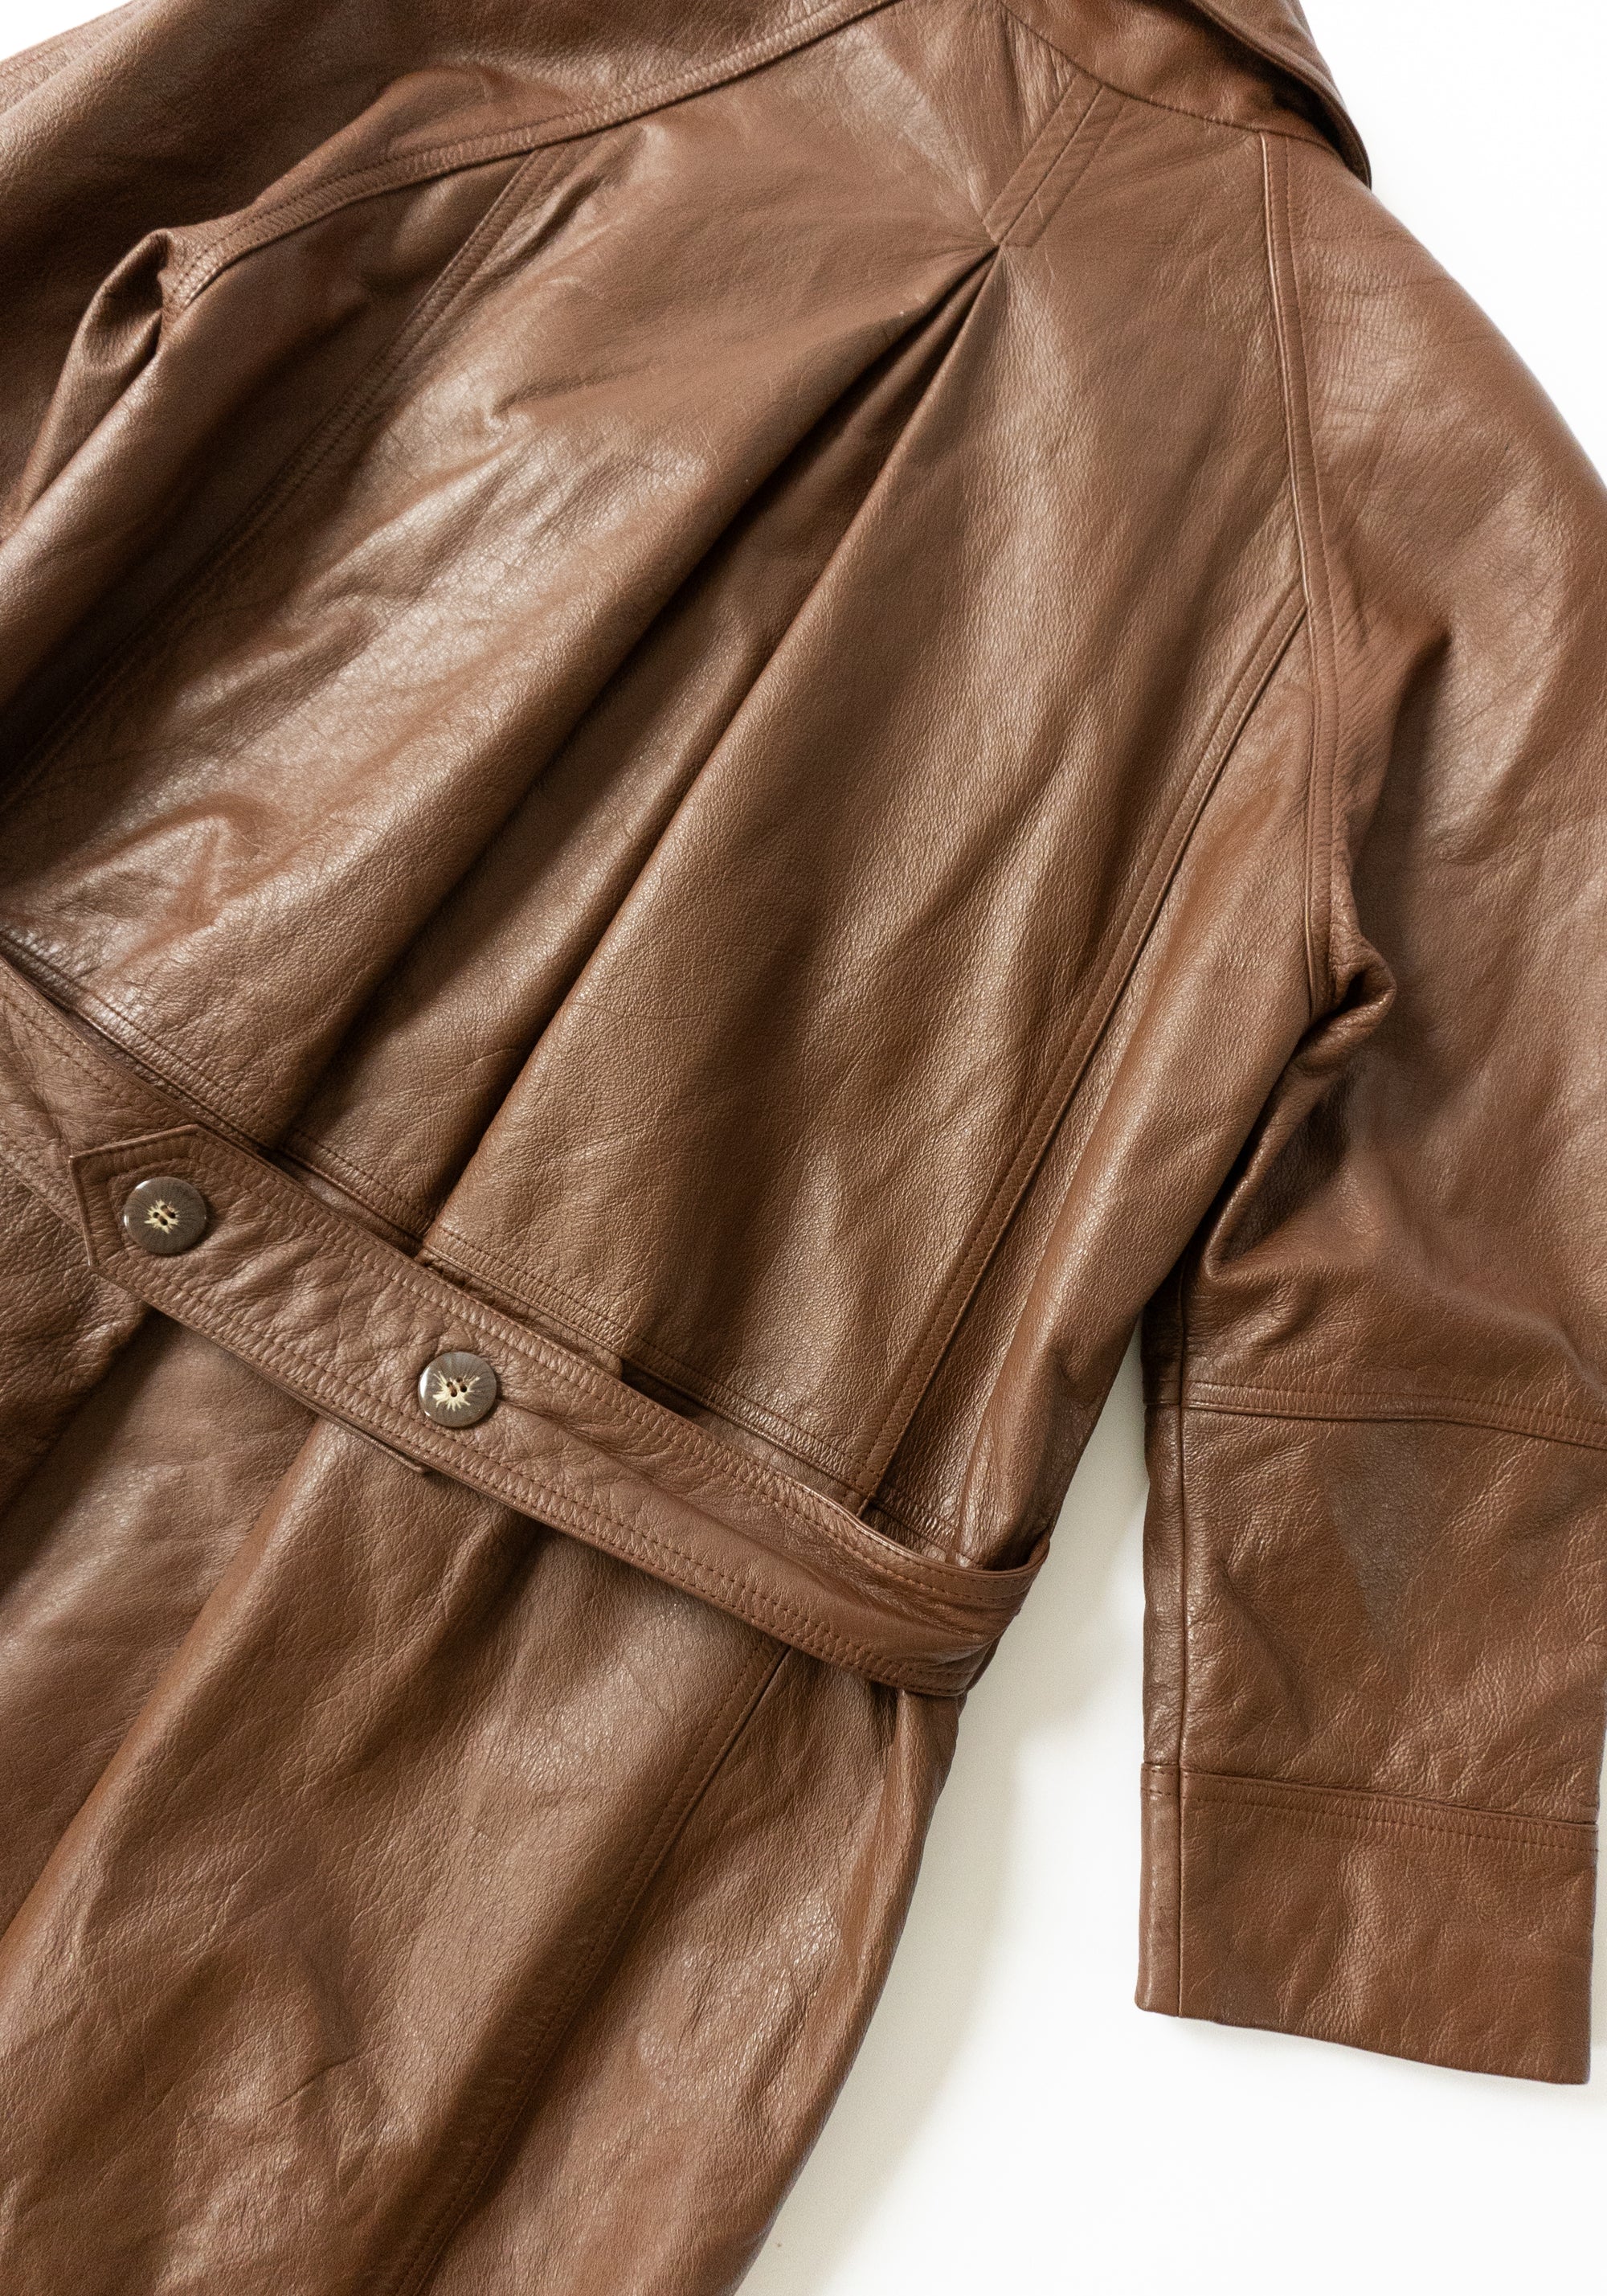 Vintage Long Brown Double Breasted Leather Trench